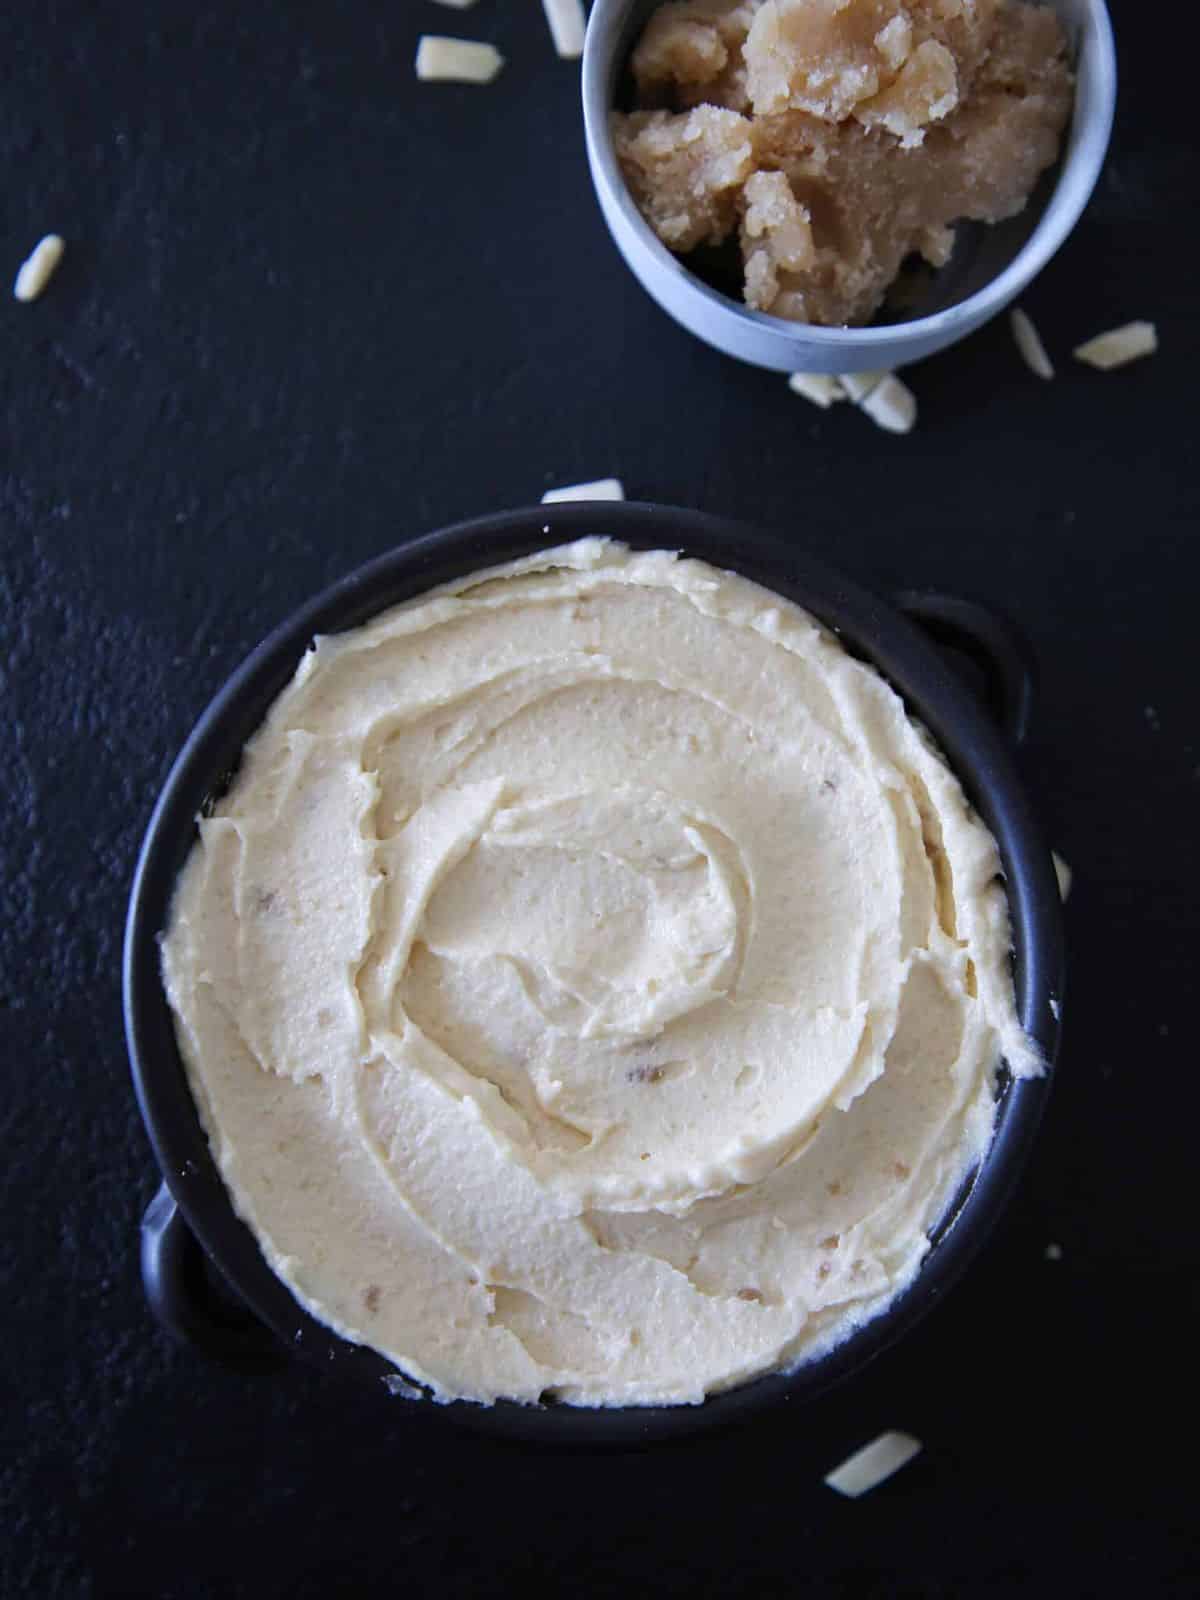 Almond cream with almond paste in a blue bowl.